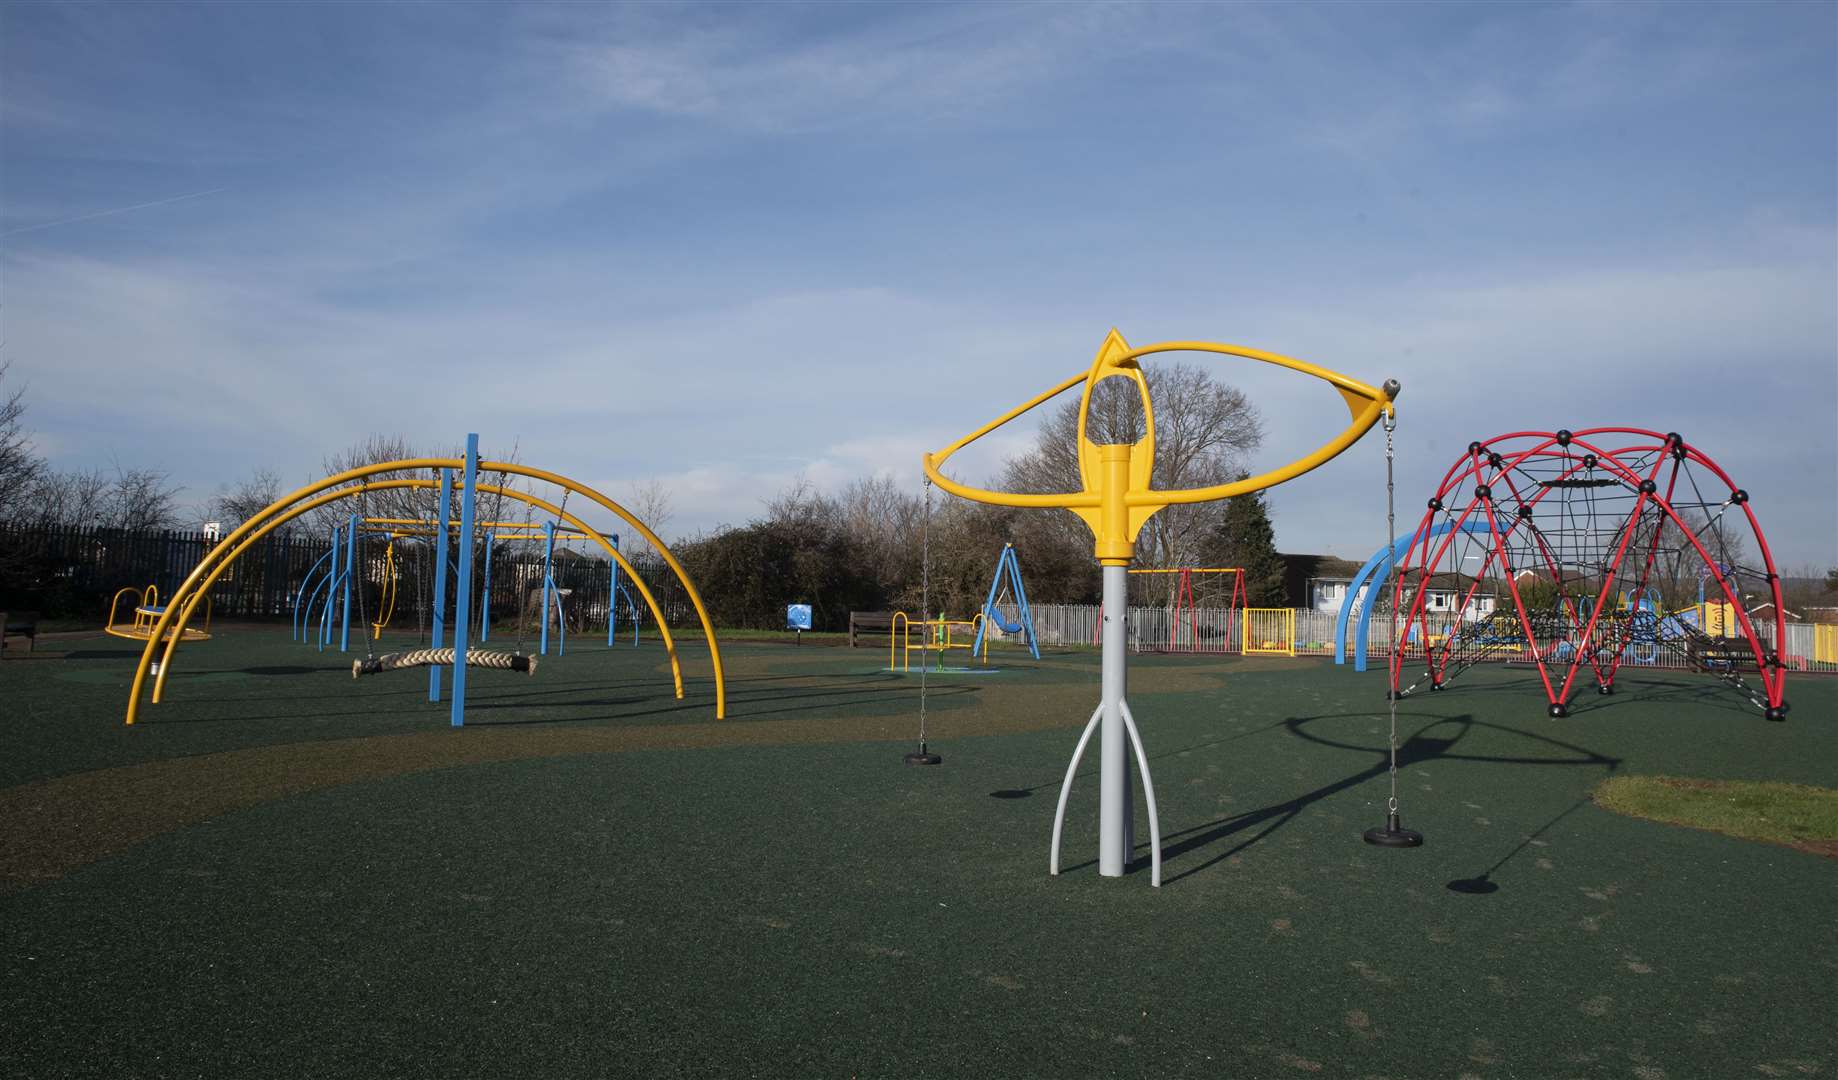 The new equipment has been installed as part of ABC's 'playground regeneration programme'